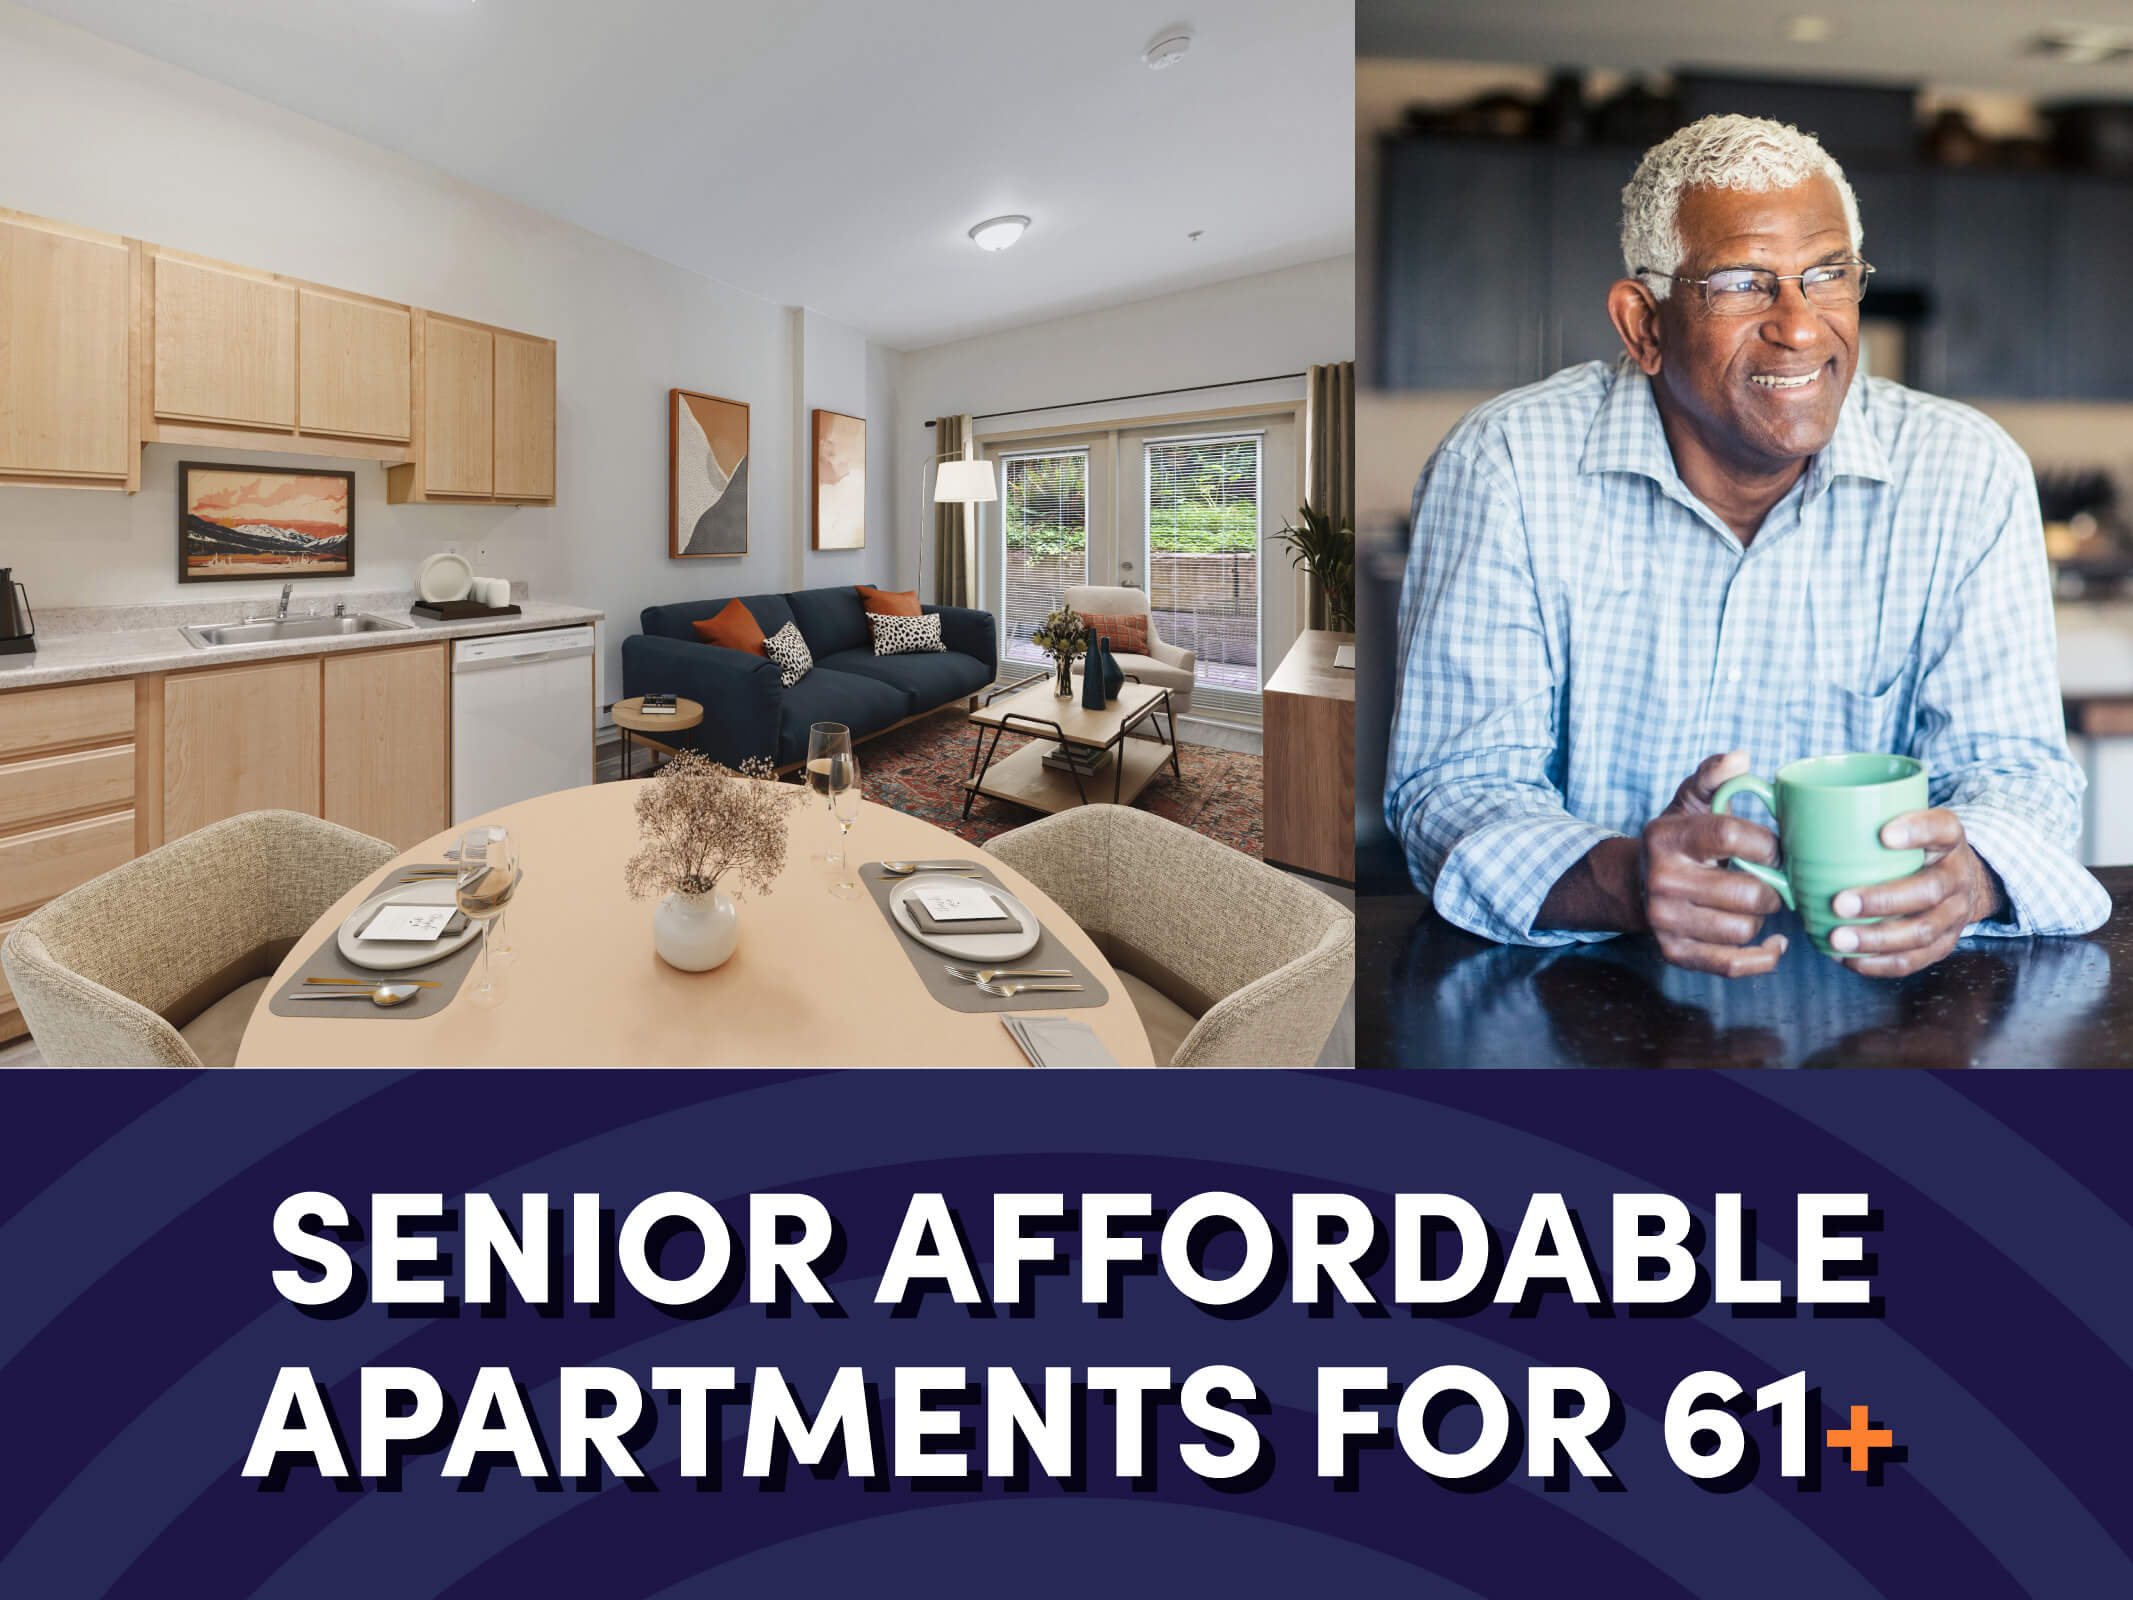 An image of a dining table by the living room next to an image of a senior man holding a mug above text that reads “Senior Affordable Apartments for 61+” for the Cedar Park Senior Affordable Apartments in Seattle, Washington.